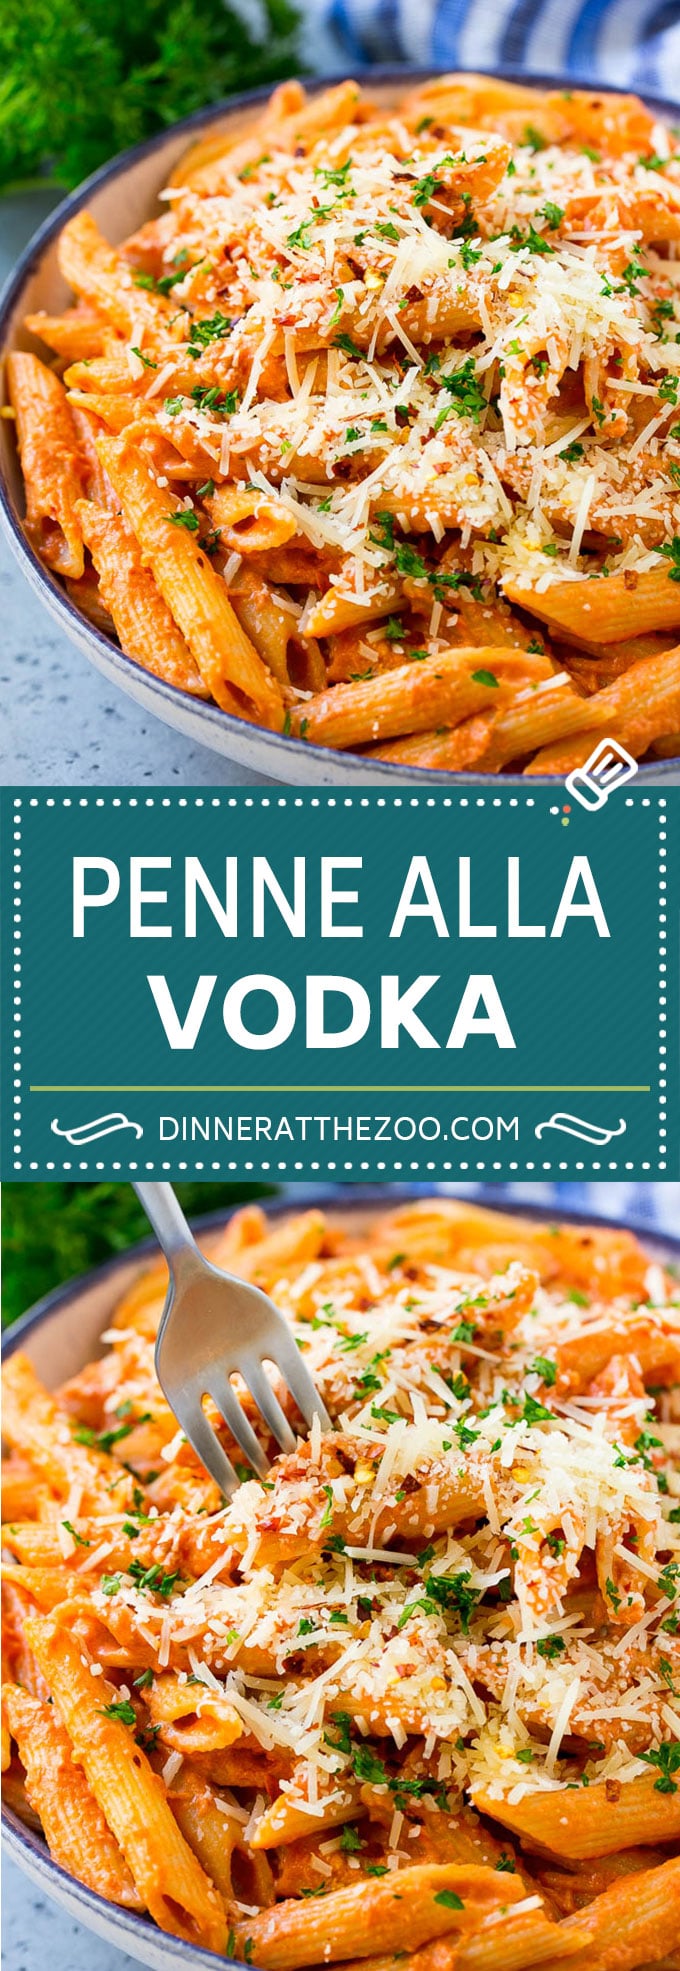 This Penne alla Vodka is tender penne pasta tossed in a rich and delicious tomato, vodka and cream sauce. Add a sprinkling of parmesan cheese and you'll have a restaurant quality meal in the comfort of your own home.